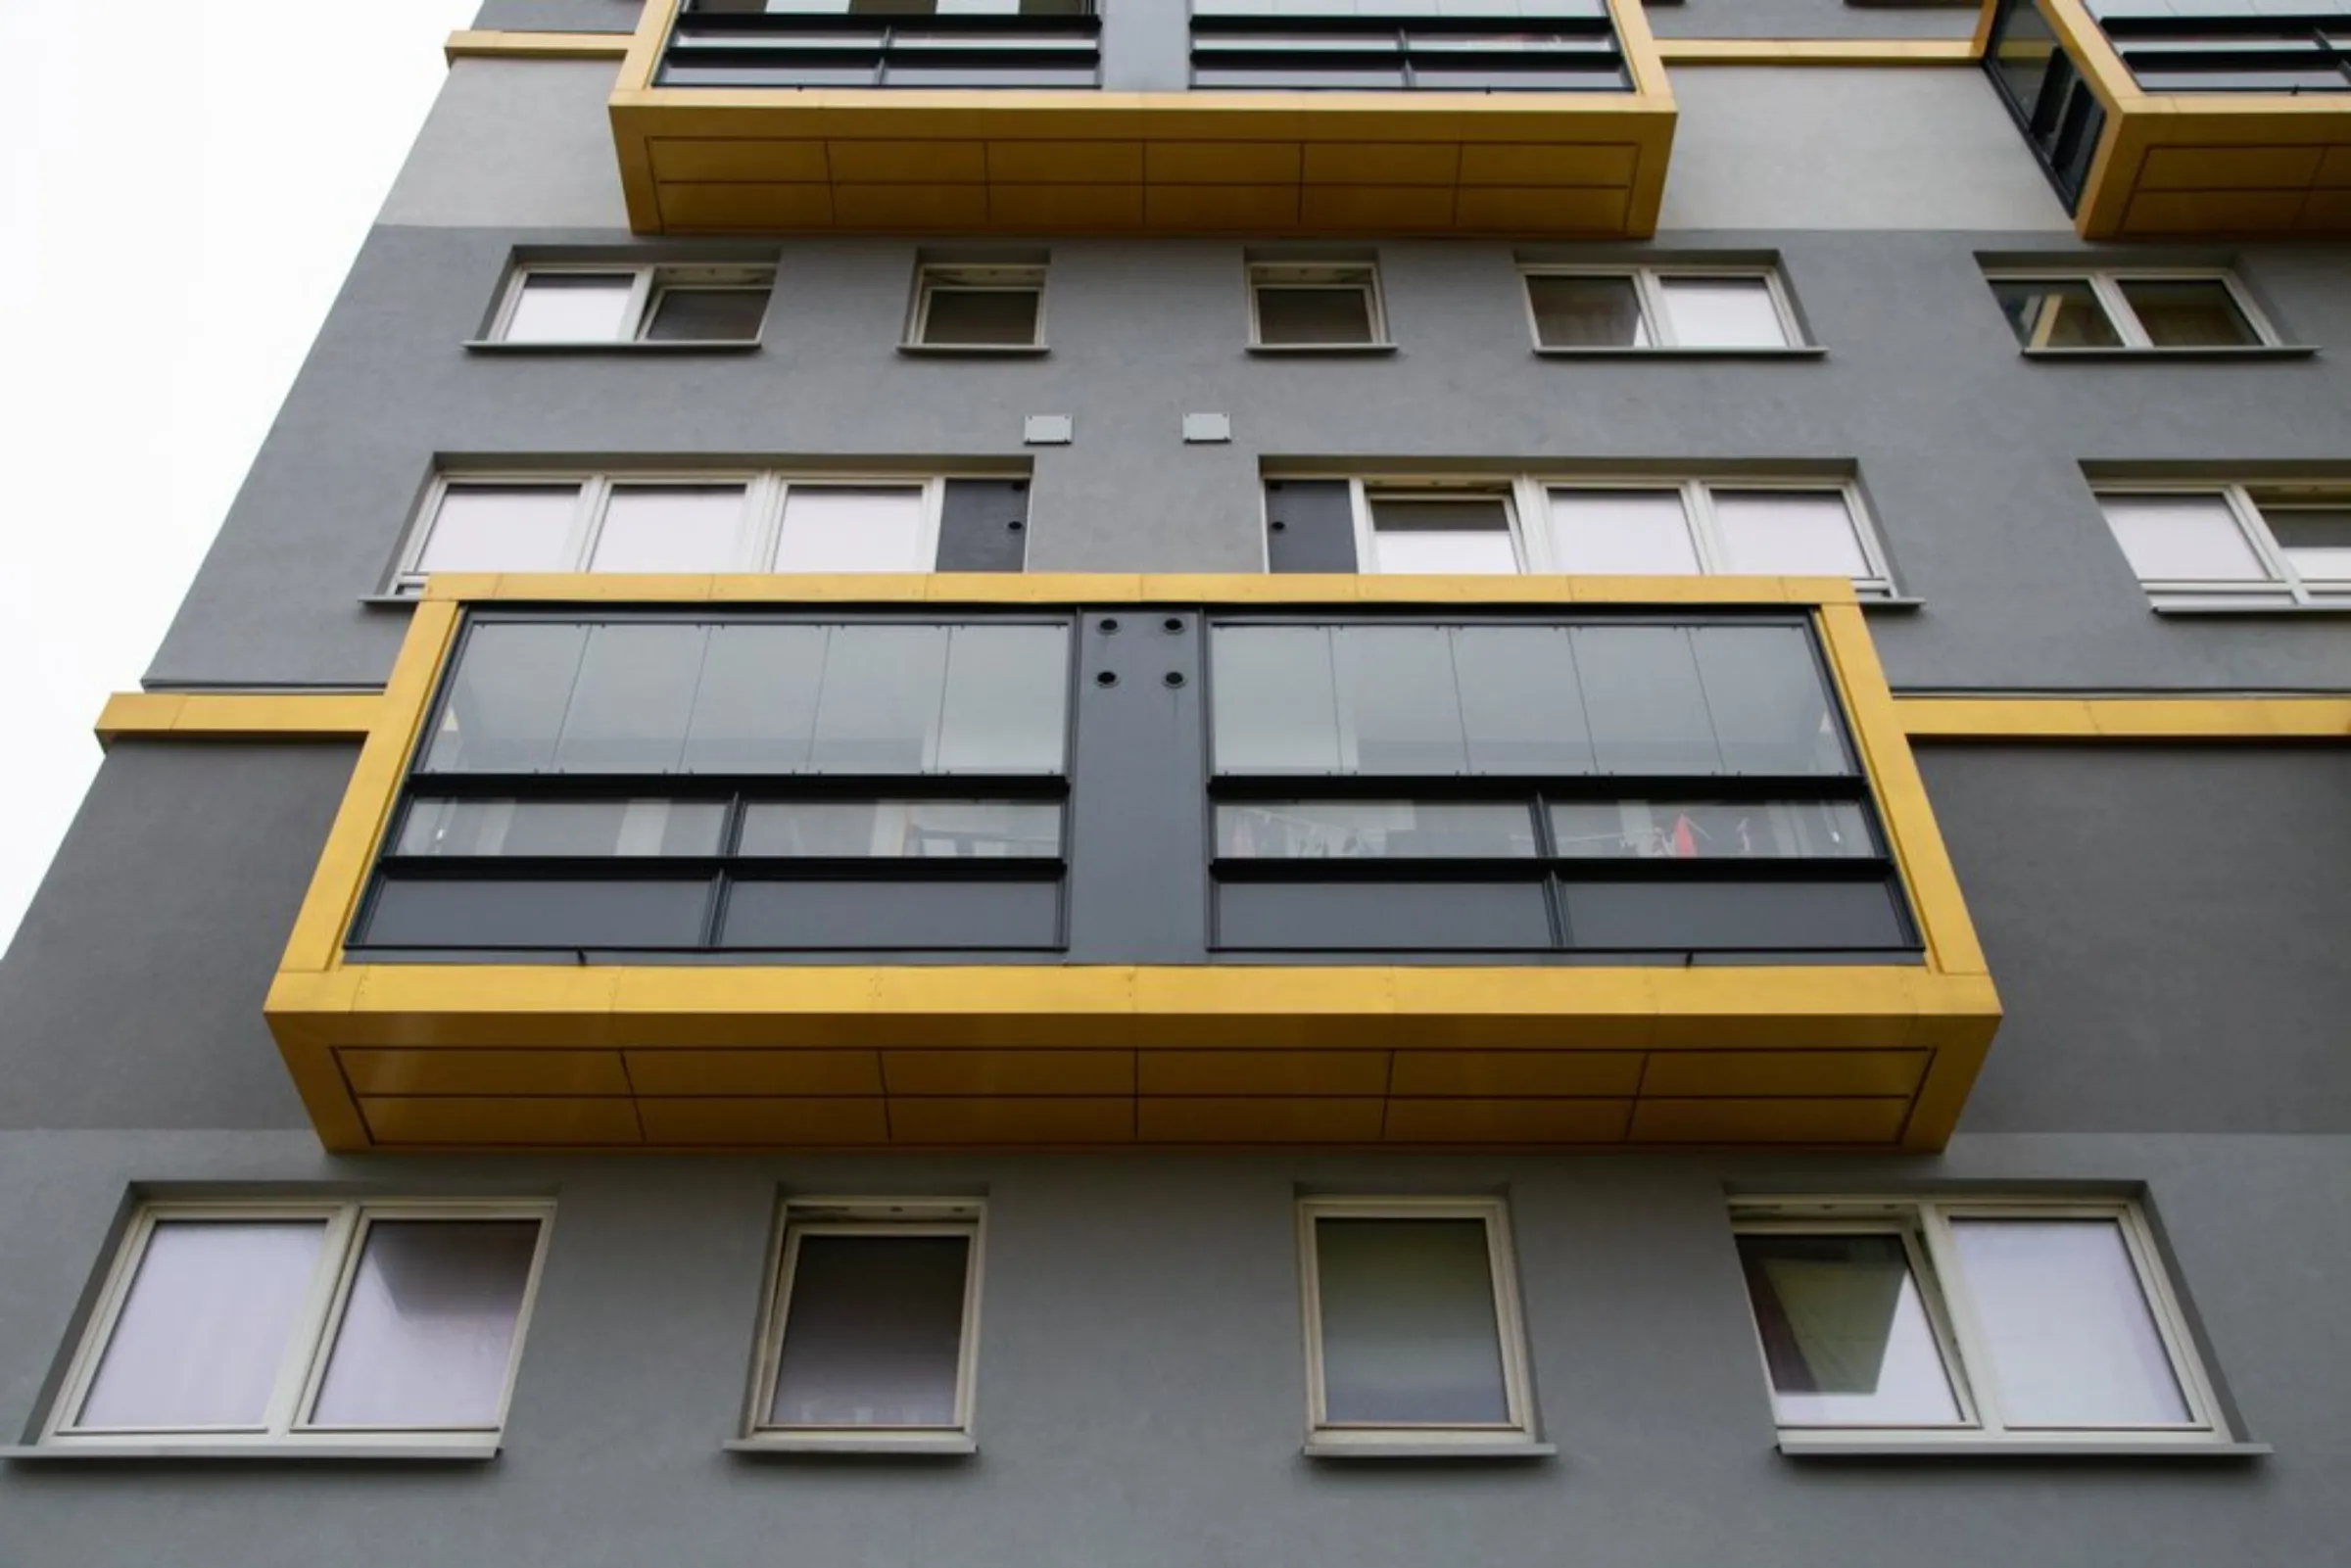 Energy efficient windows are seen on a refurbished housing block in Glasgow, United Kingdom, July 23, 2021